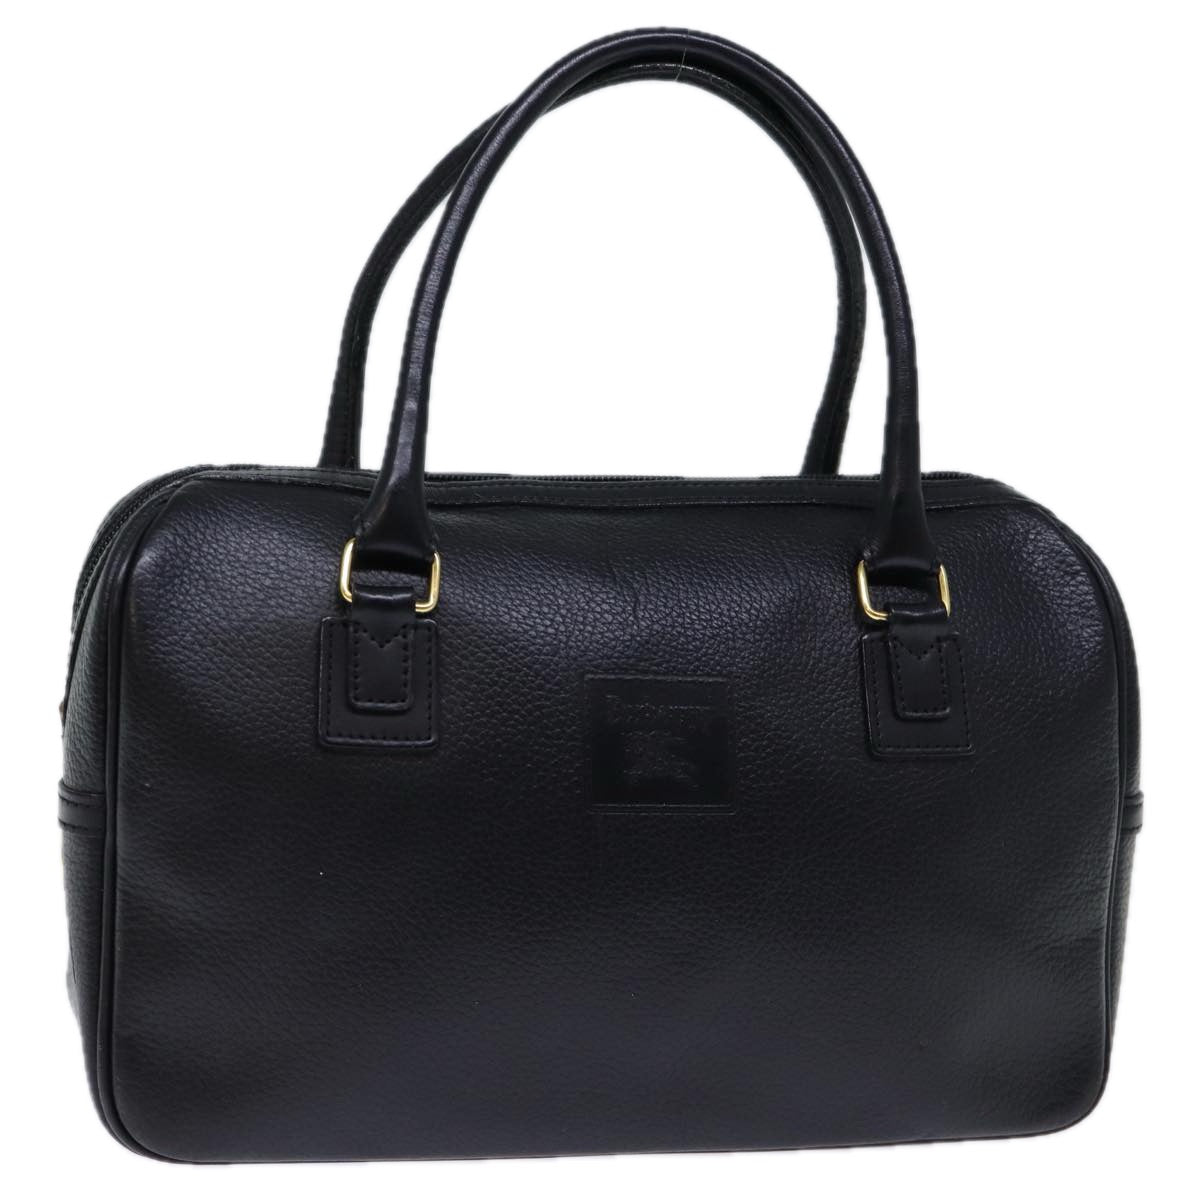 Burberrys Hand Bag Leather Black Auth bs13821